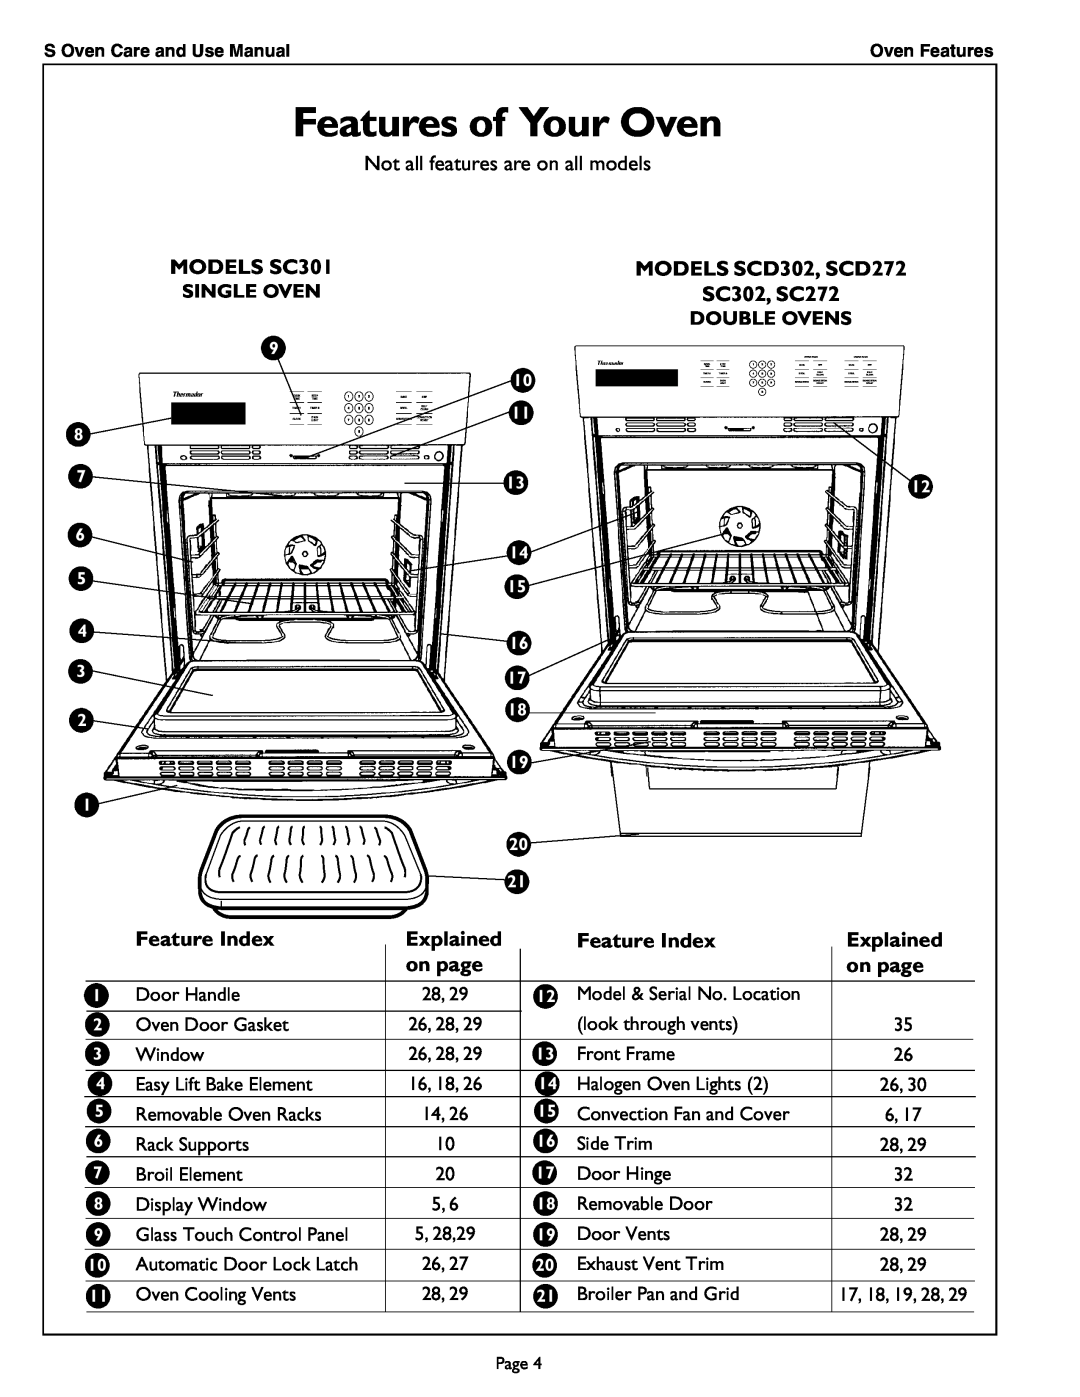 Thermador Features of Your Oven, MODELS SC301, MODELS SCD302, SCD272 SC302, SC272, Feature Index, Explained, on page 